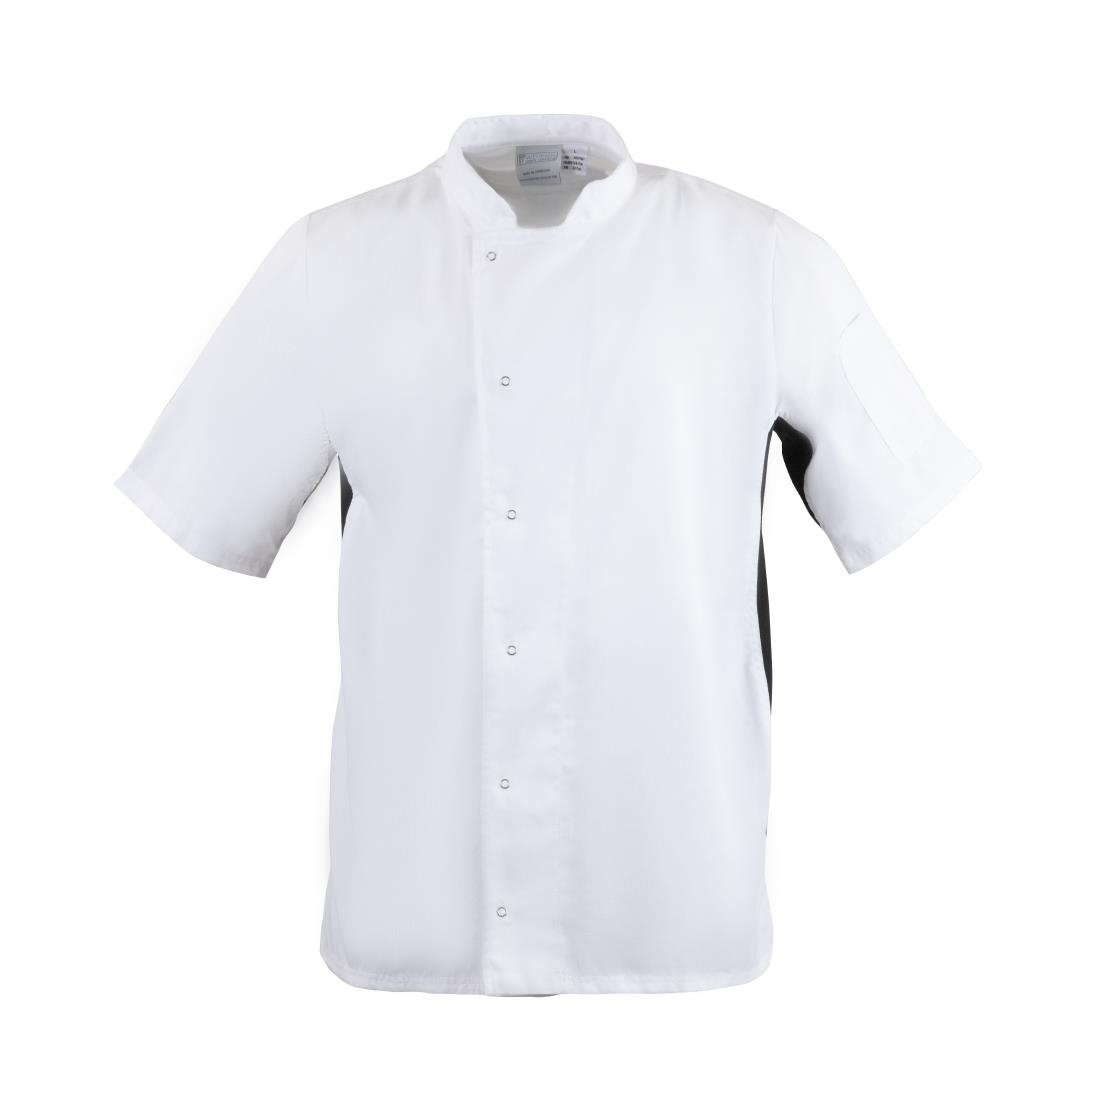 A928-XS Whites Nevada Unisex Chefs Jacket Short Sleeve Black and White XS JD Catering Equipment Solutions Ltd